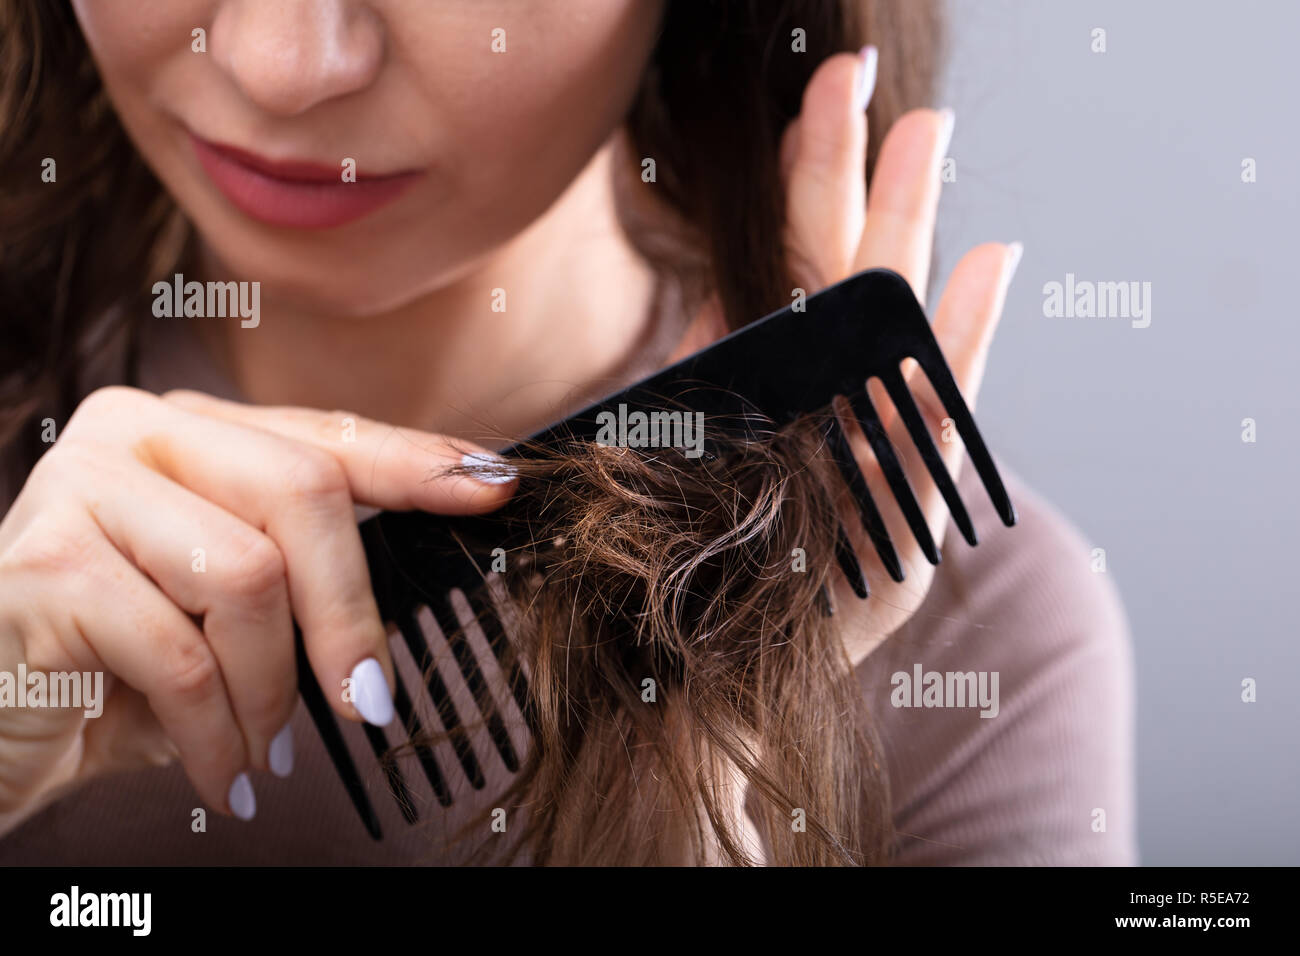 Close-up Of A Woman's Hand Combing Her Hair With Comb Stock Photo